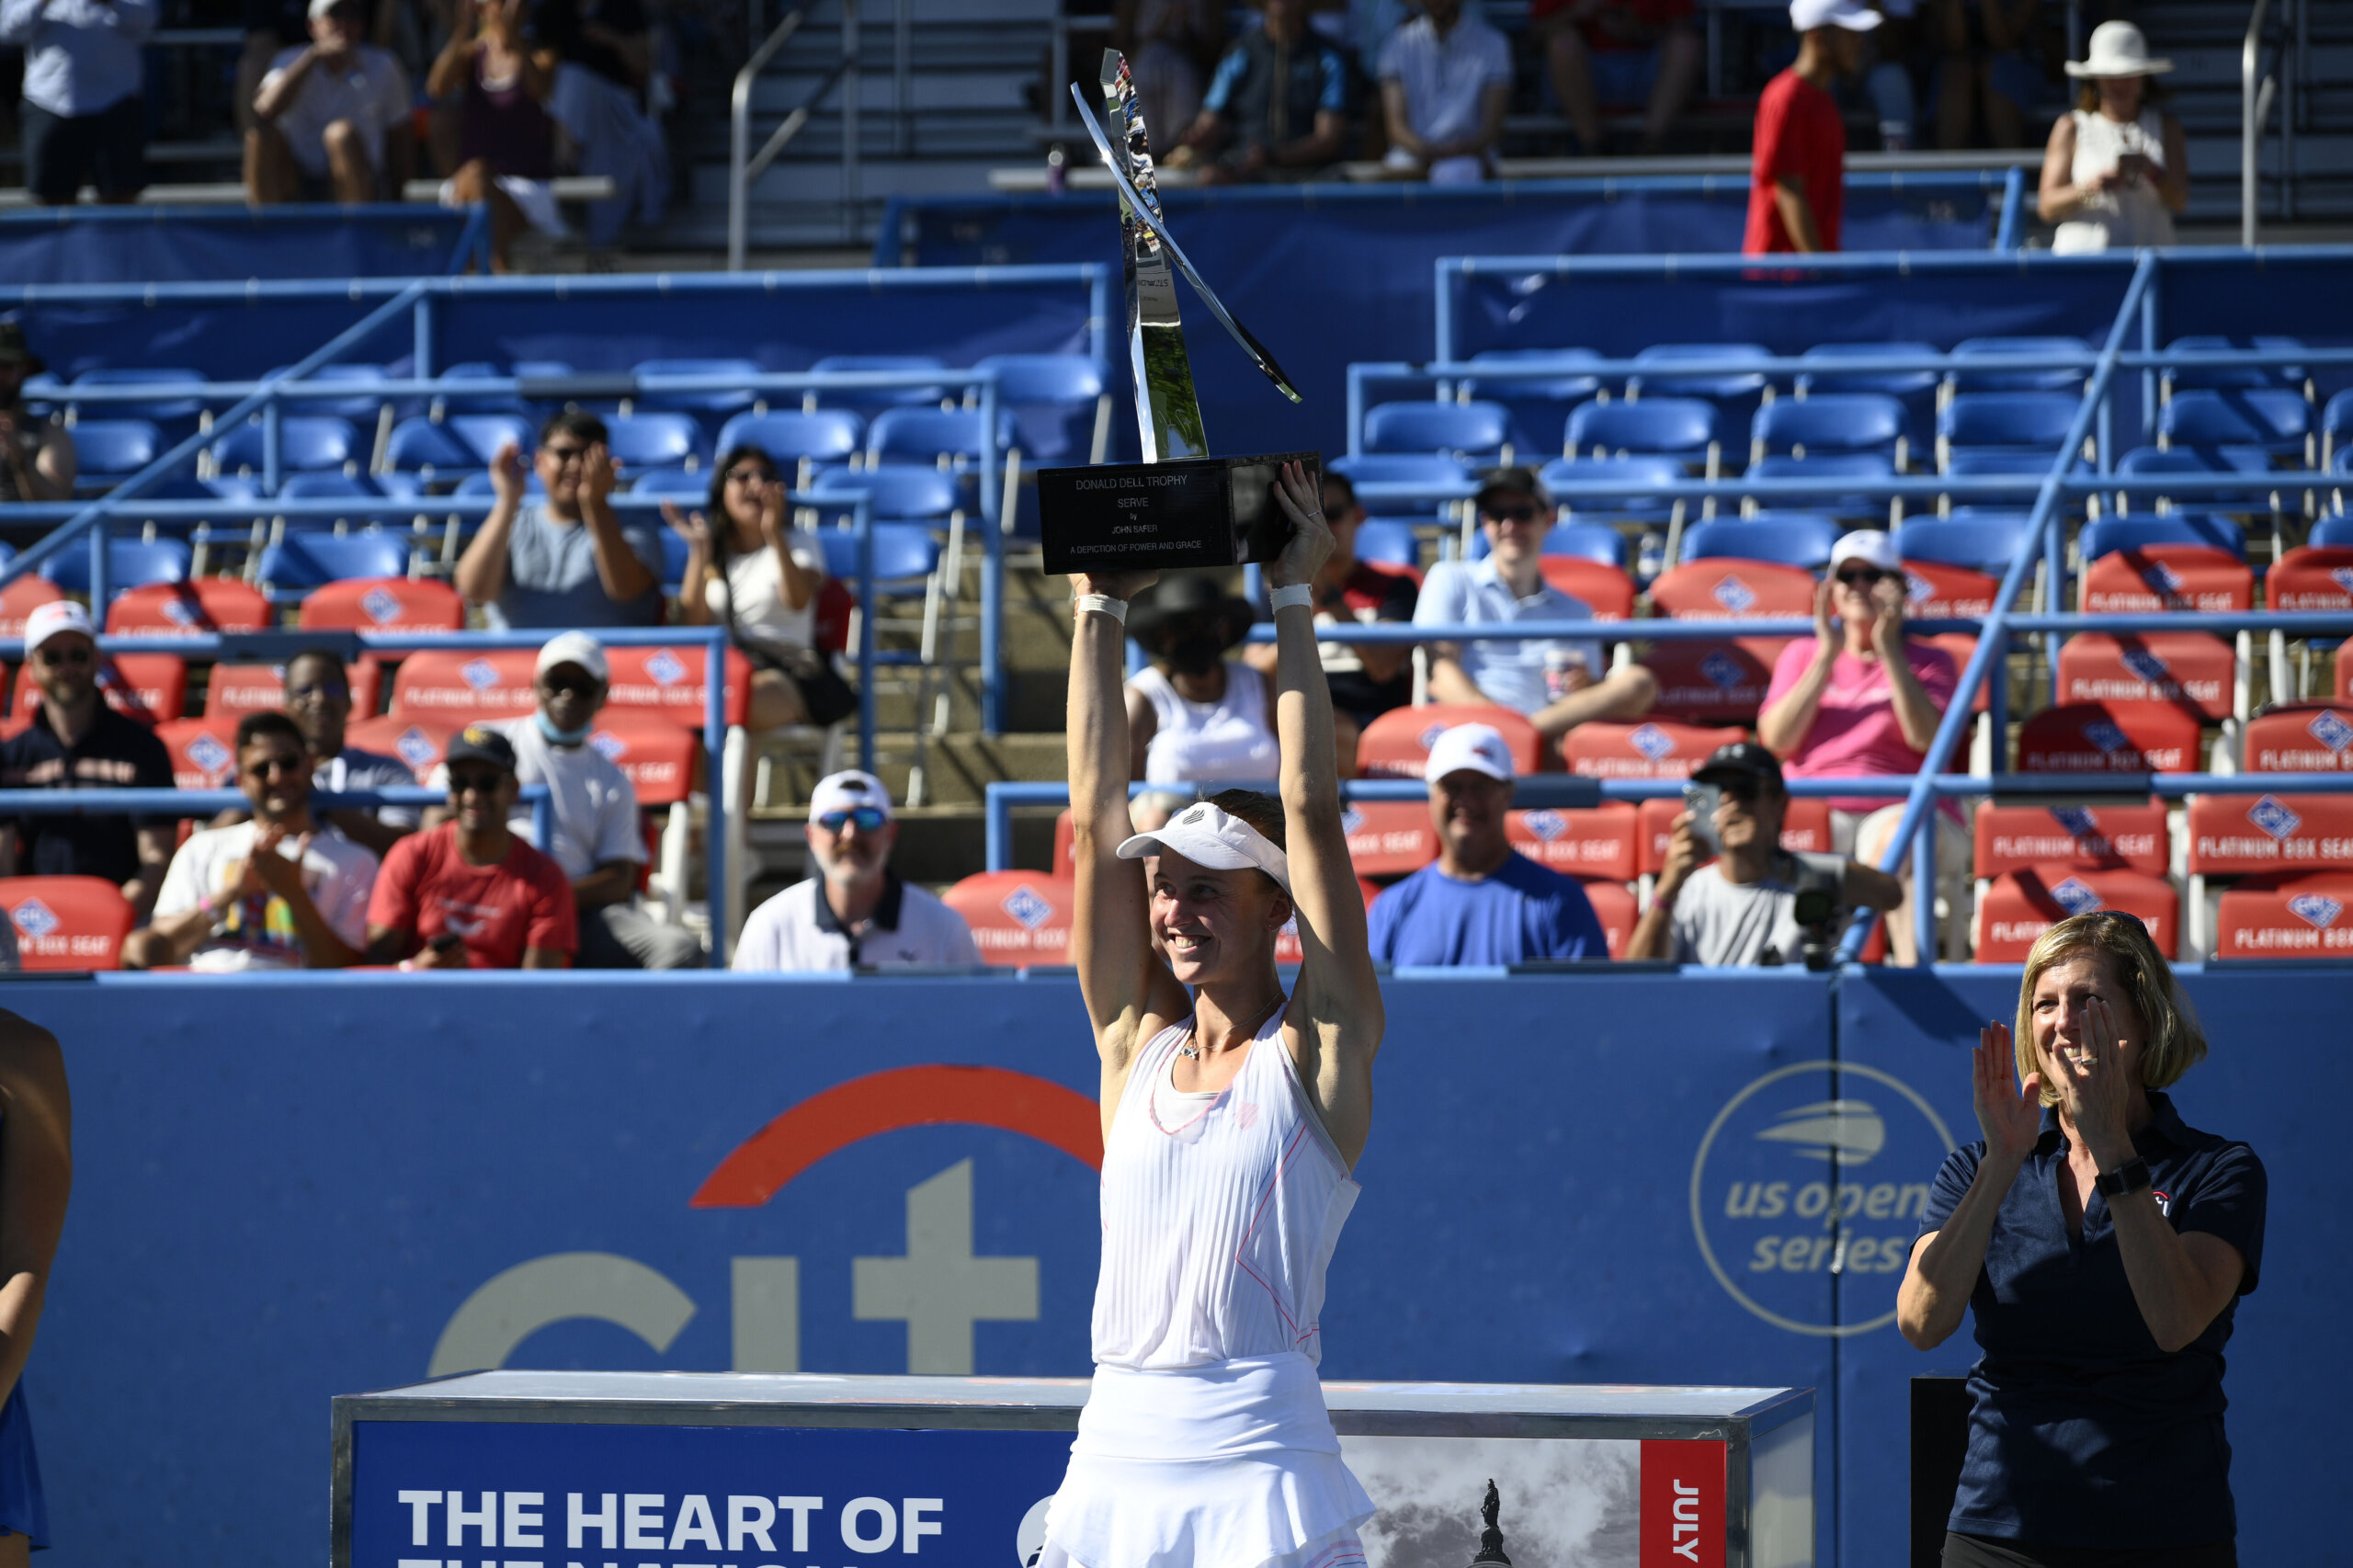 Womens tennis upgrade DCs Citi Open merges with Silicon Valley Classic